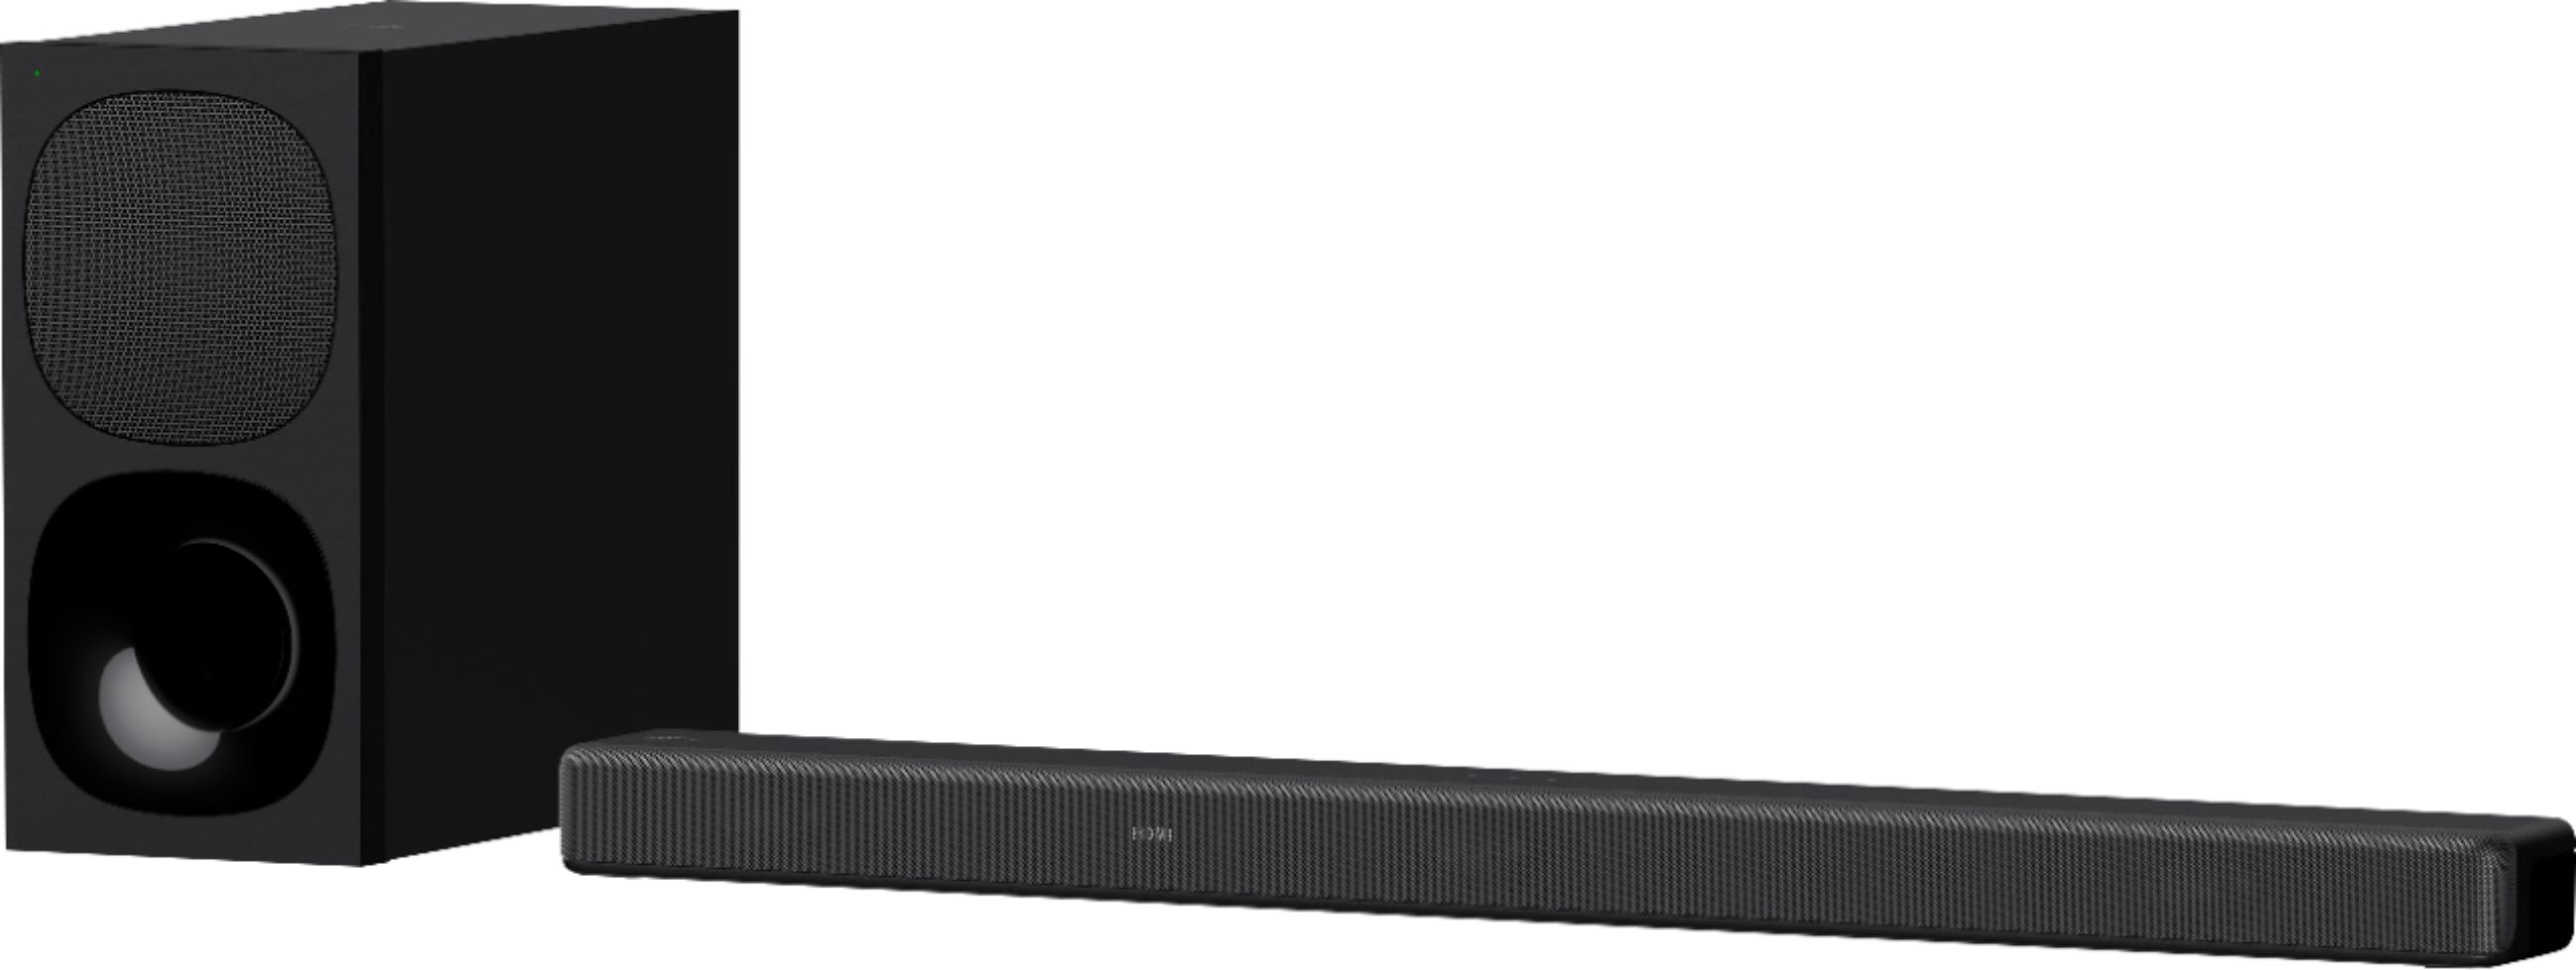 Best Buy: Sony HT-G700 3.1 Channel HTG700 with Soundbar Wireless Atmos/DTS:X Dolby Subwoofer and Black